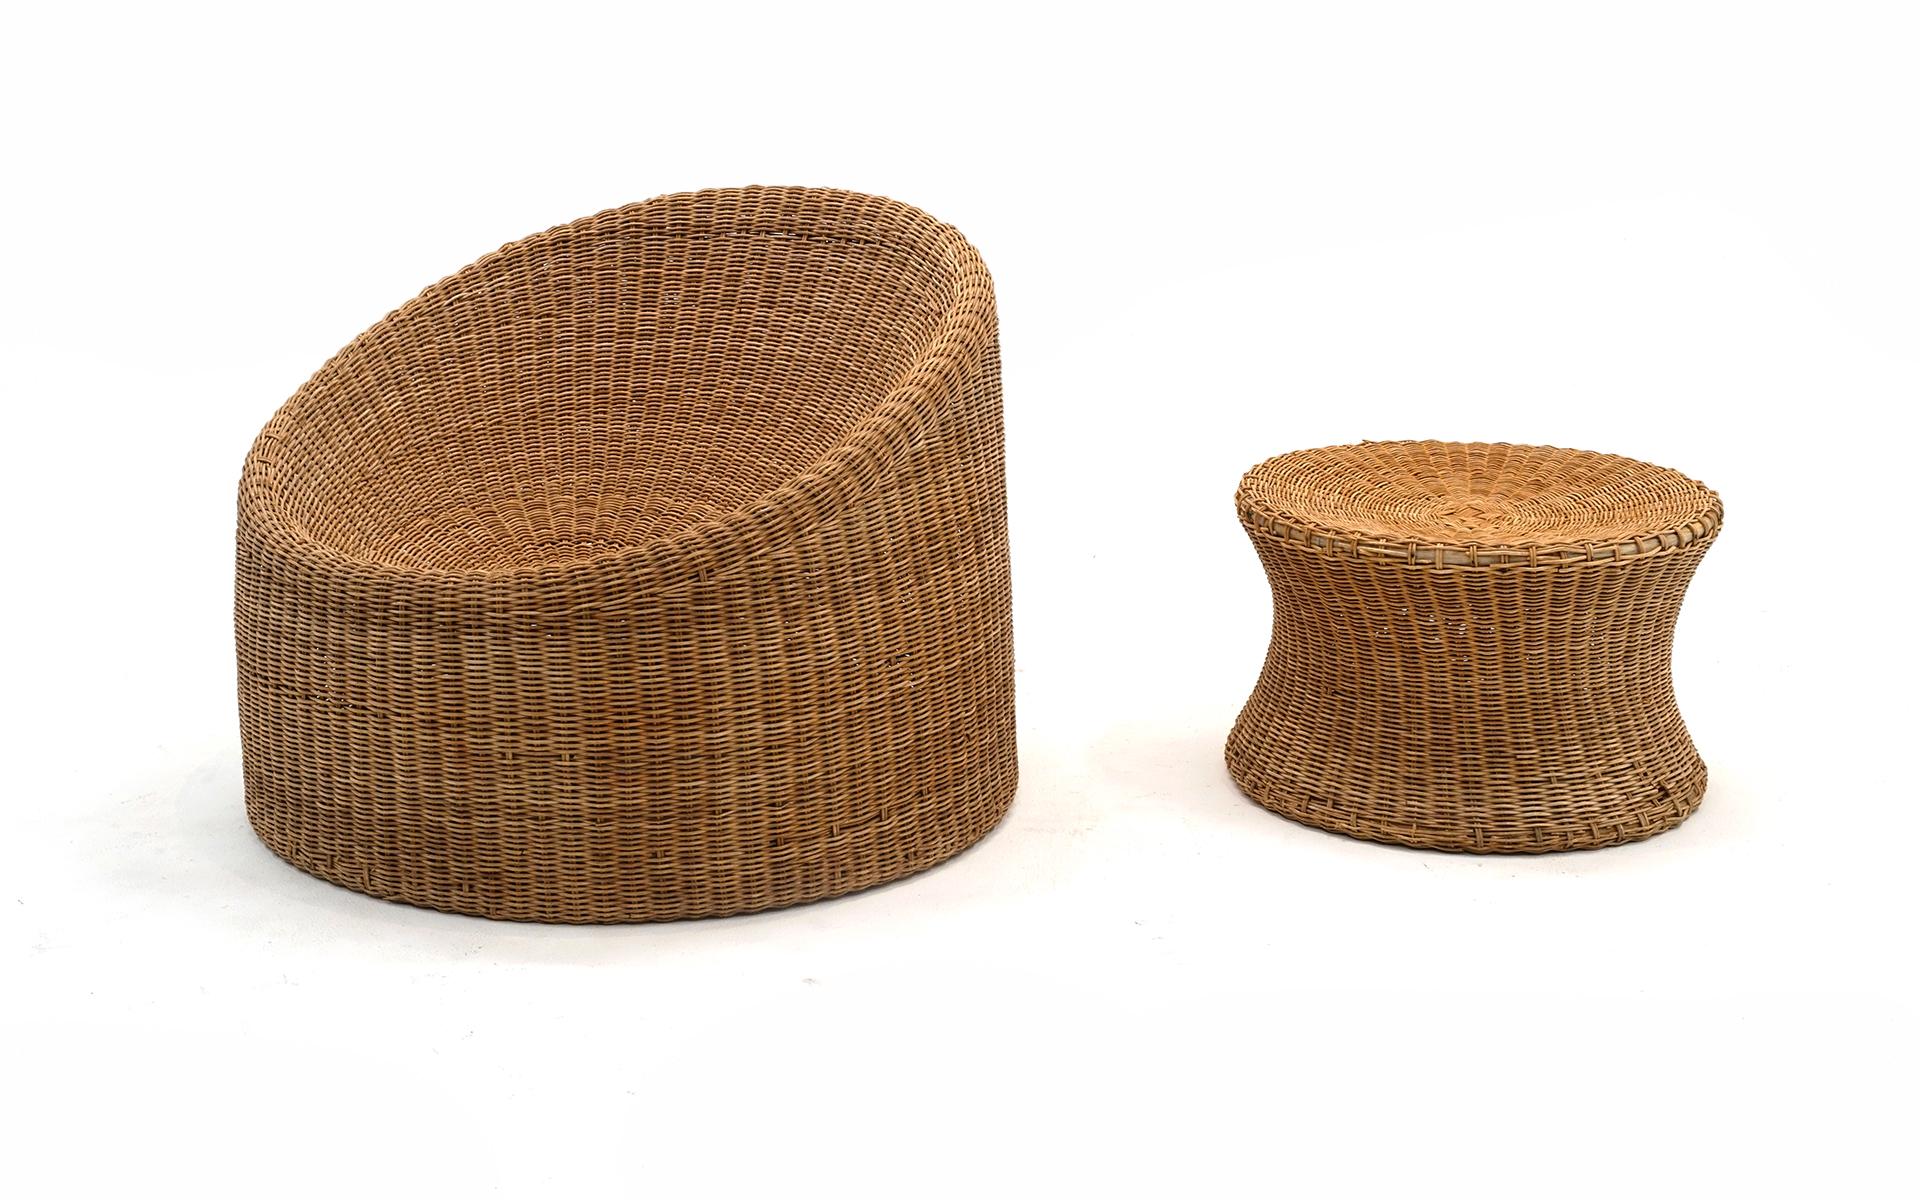 Finnish Wicker Chair and Ottoman by Eero Aarnio, Finland, 1960s